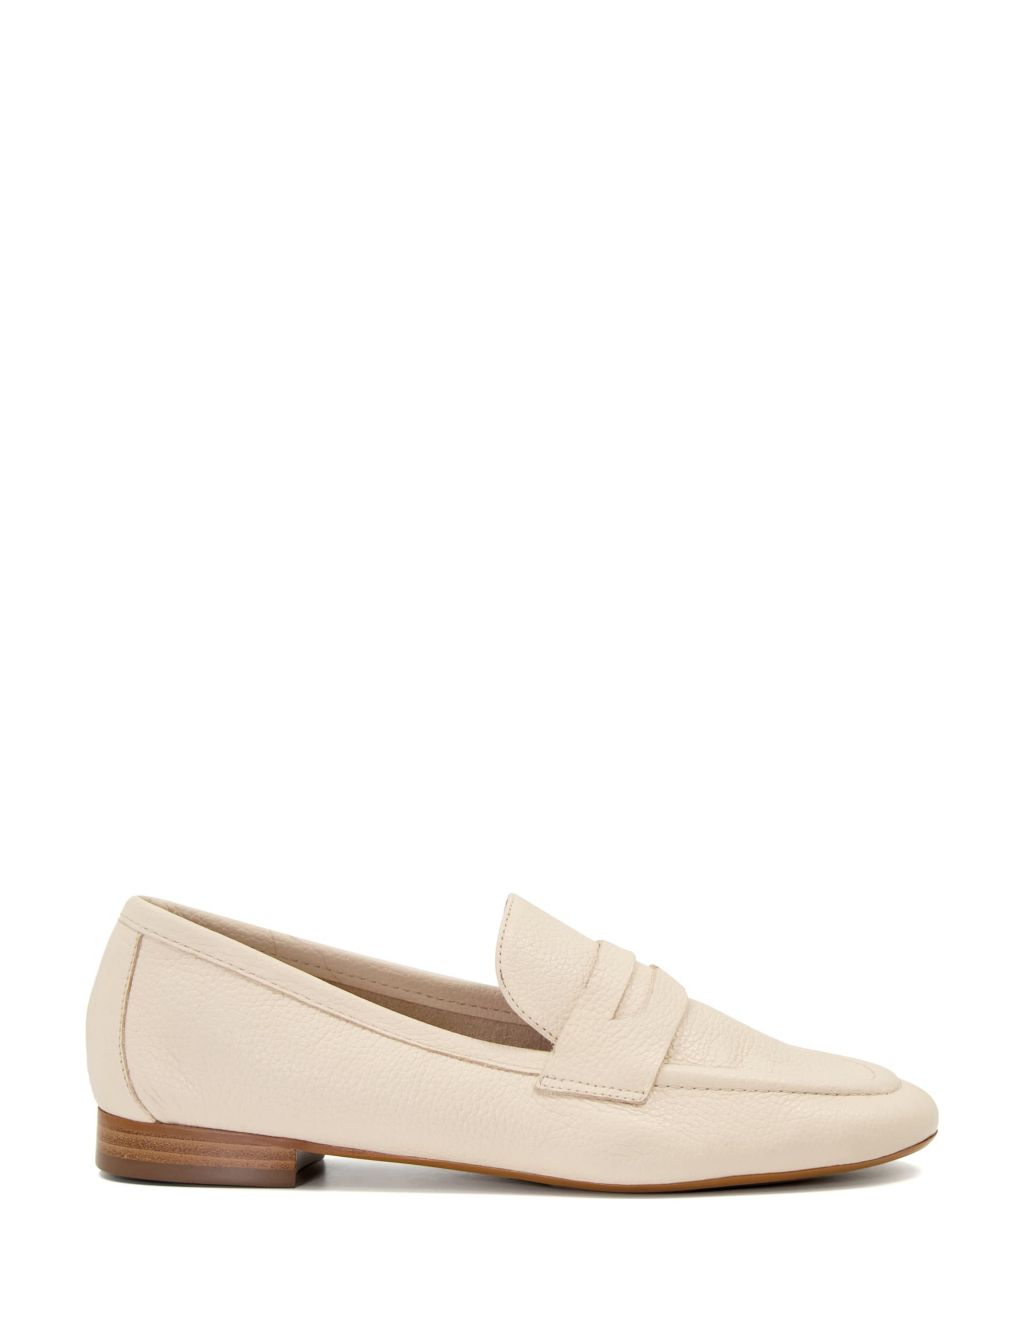 Leather Slip On Loafers image 1